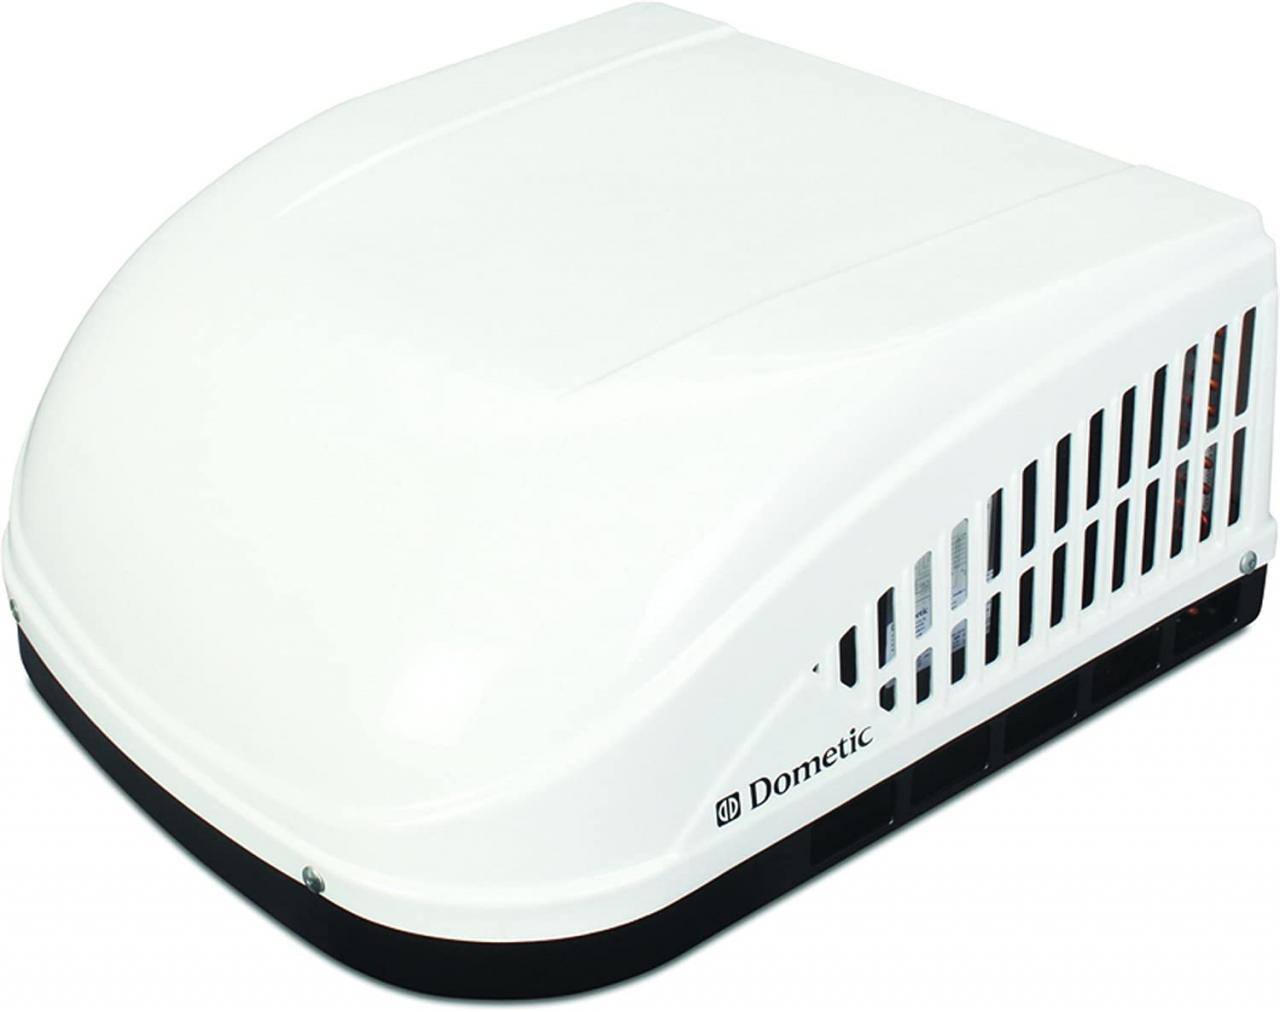 Dometic RV Air Conditioner Reviews and Buying Guide - PICKHVAC